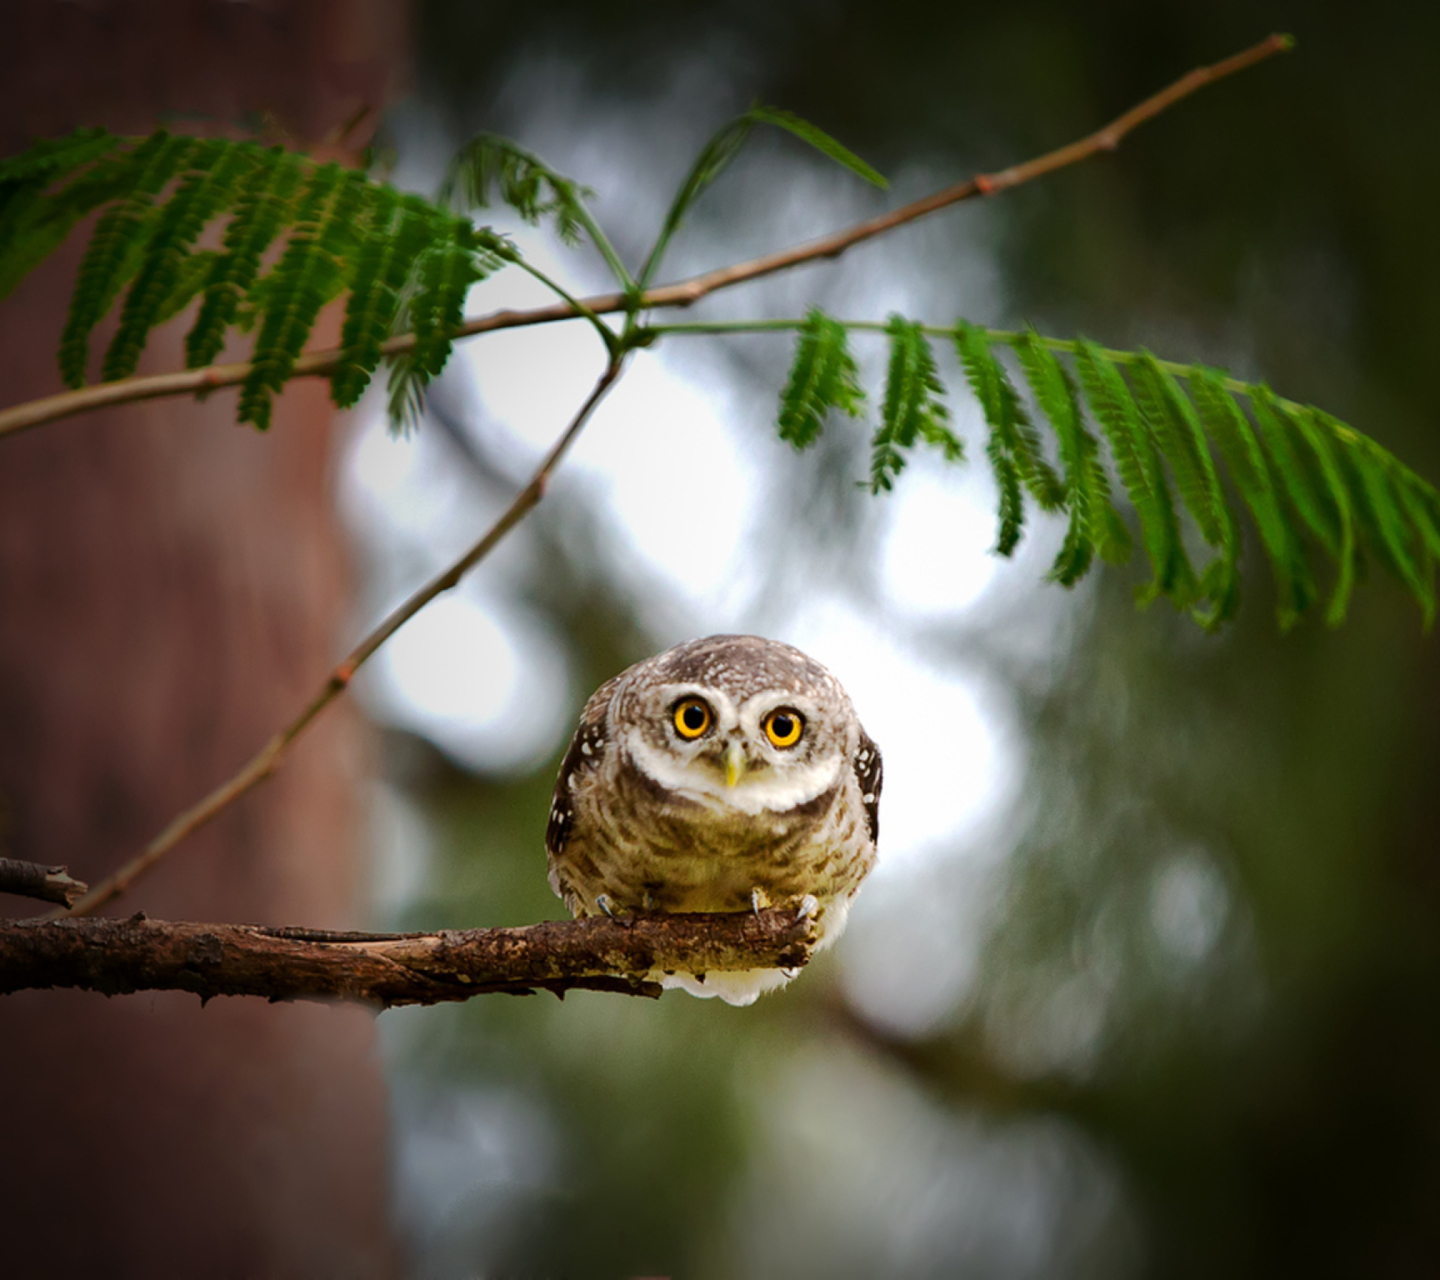 Cute And Funny Little Owl With Big Eyes screenshot #1 1440x1280